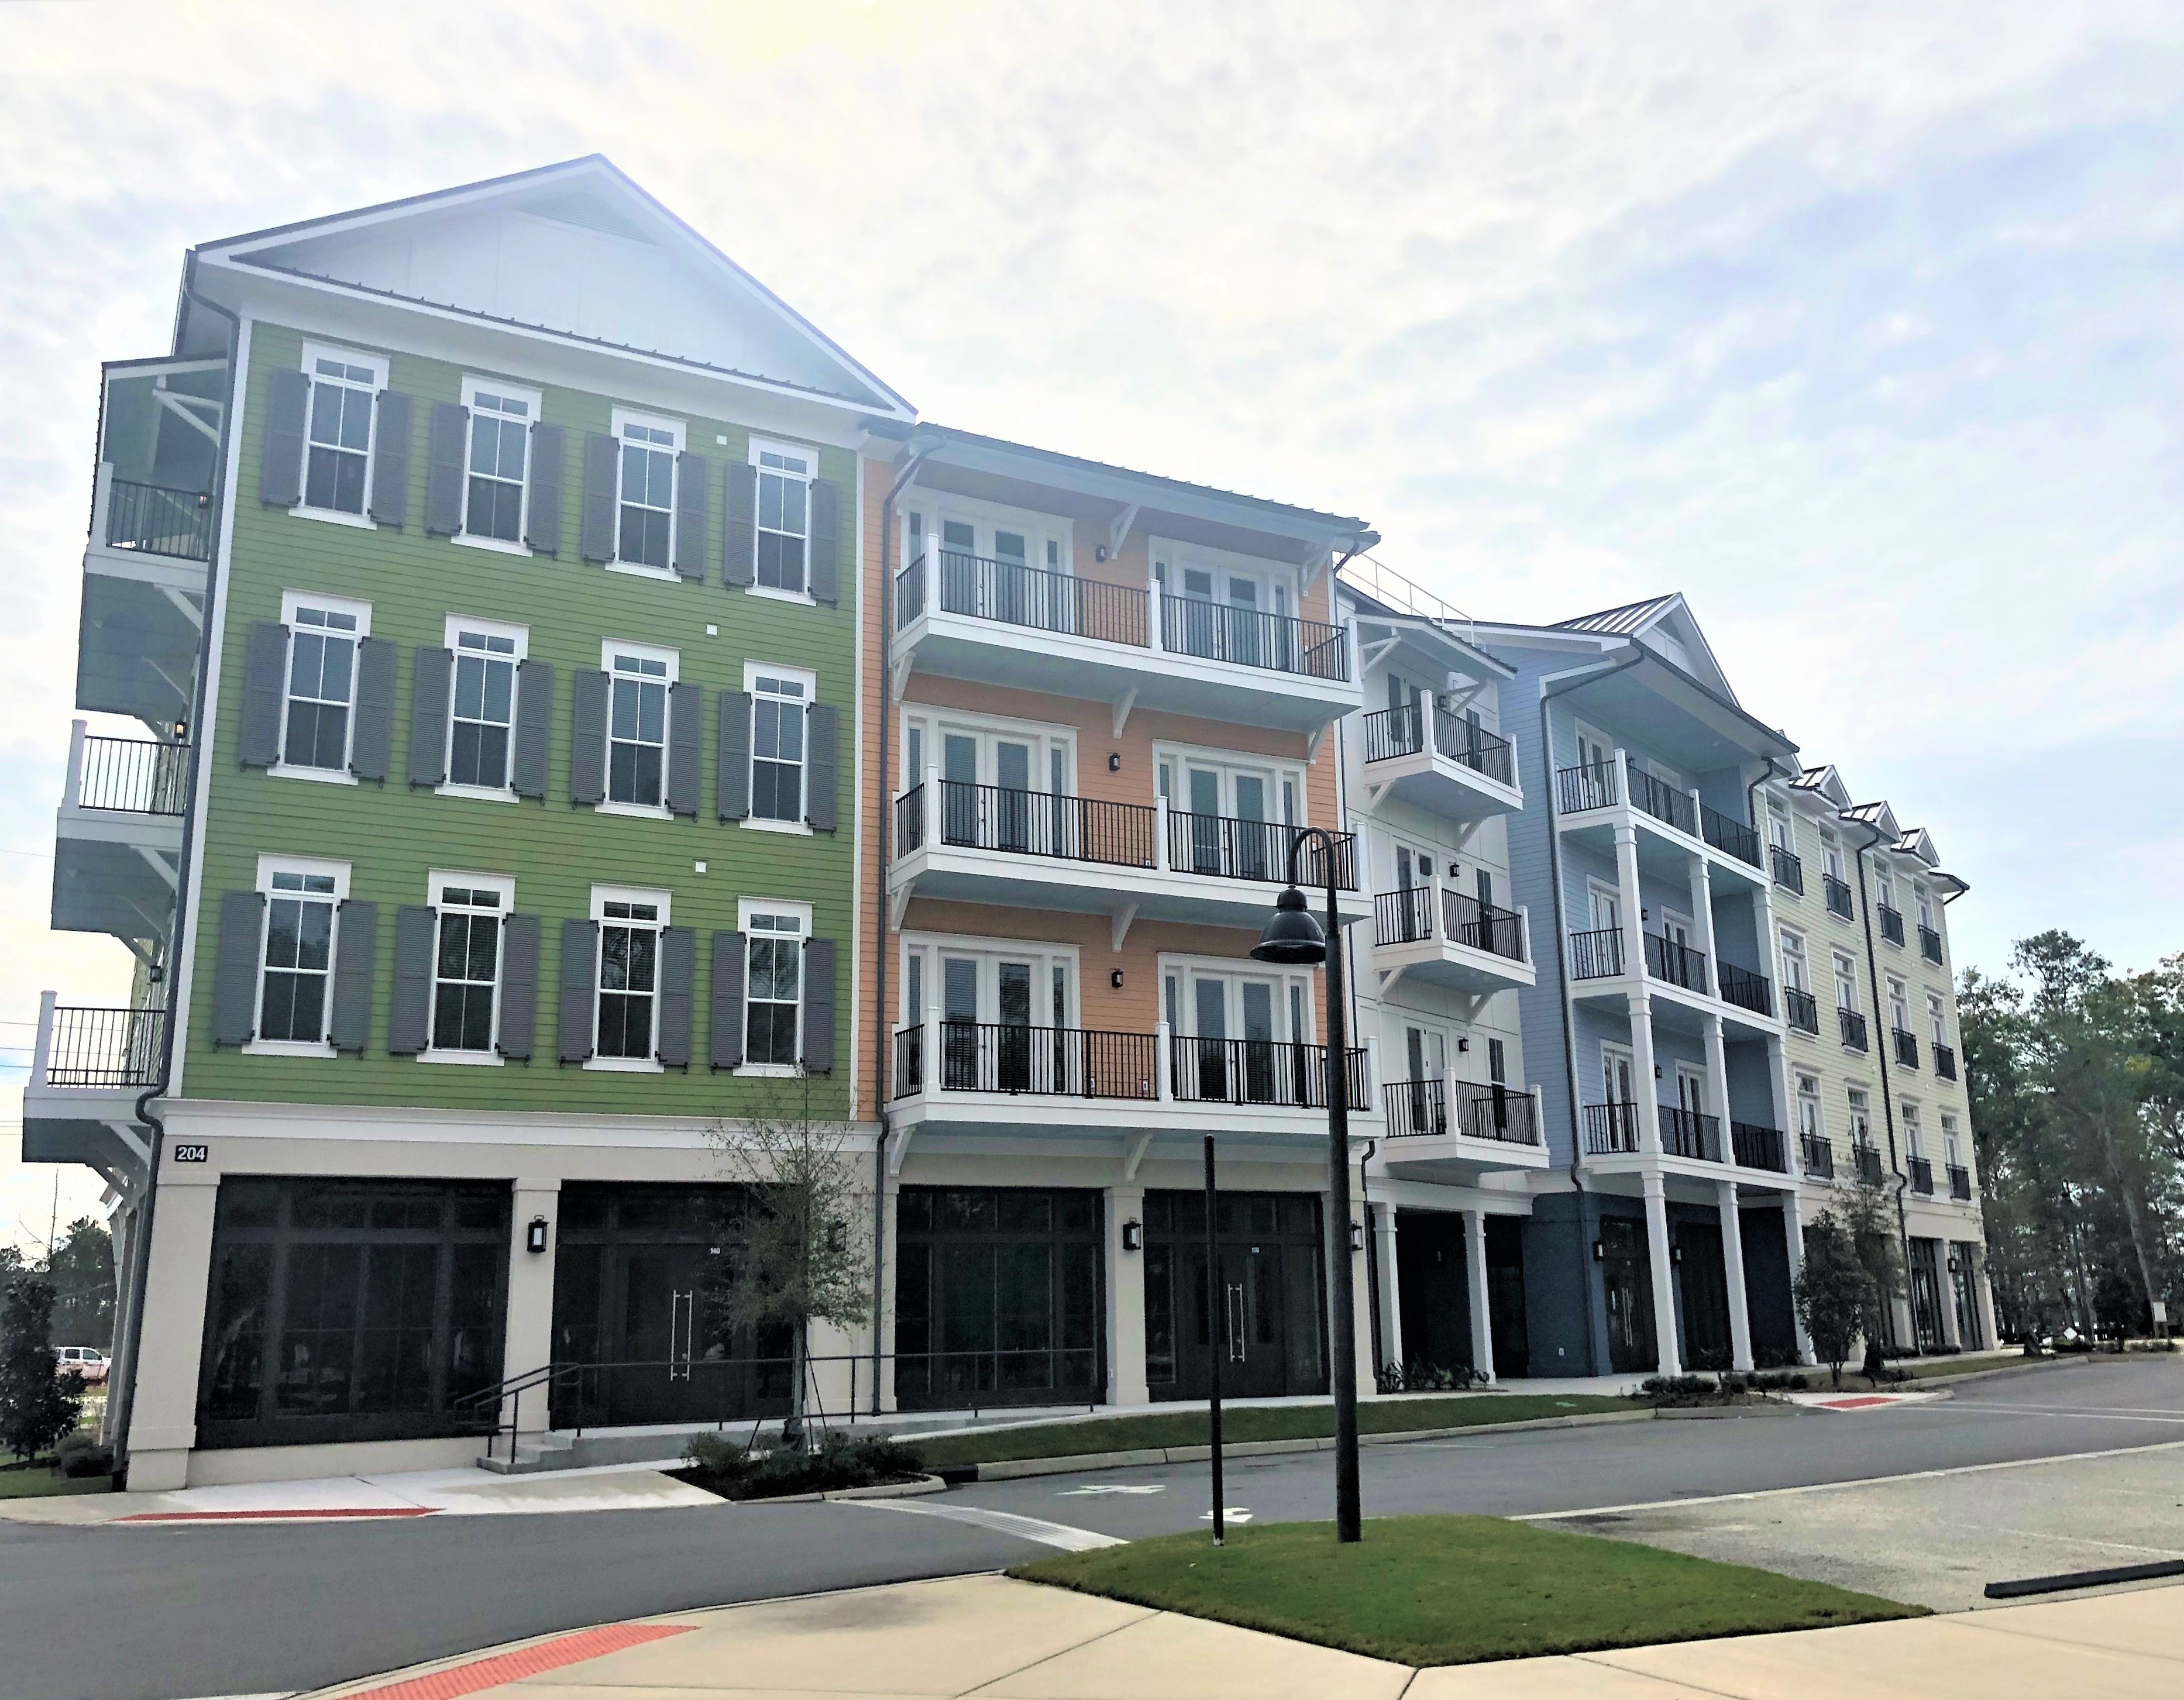 The Brand-New MV Flats at Riverlights Brings Luxury Apartment Living to Wilmington